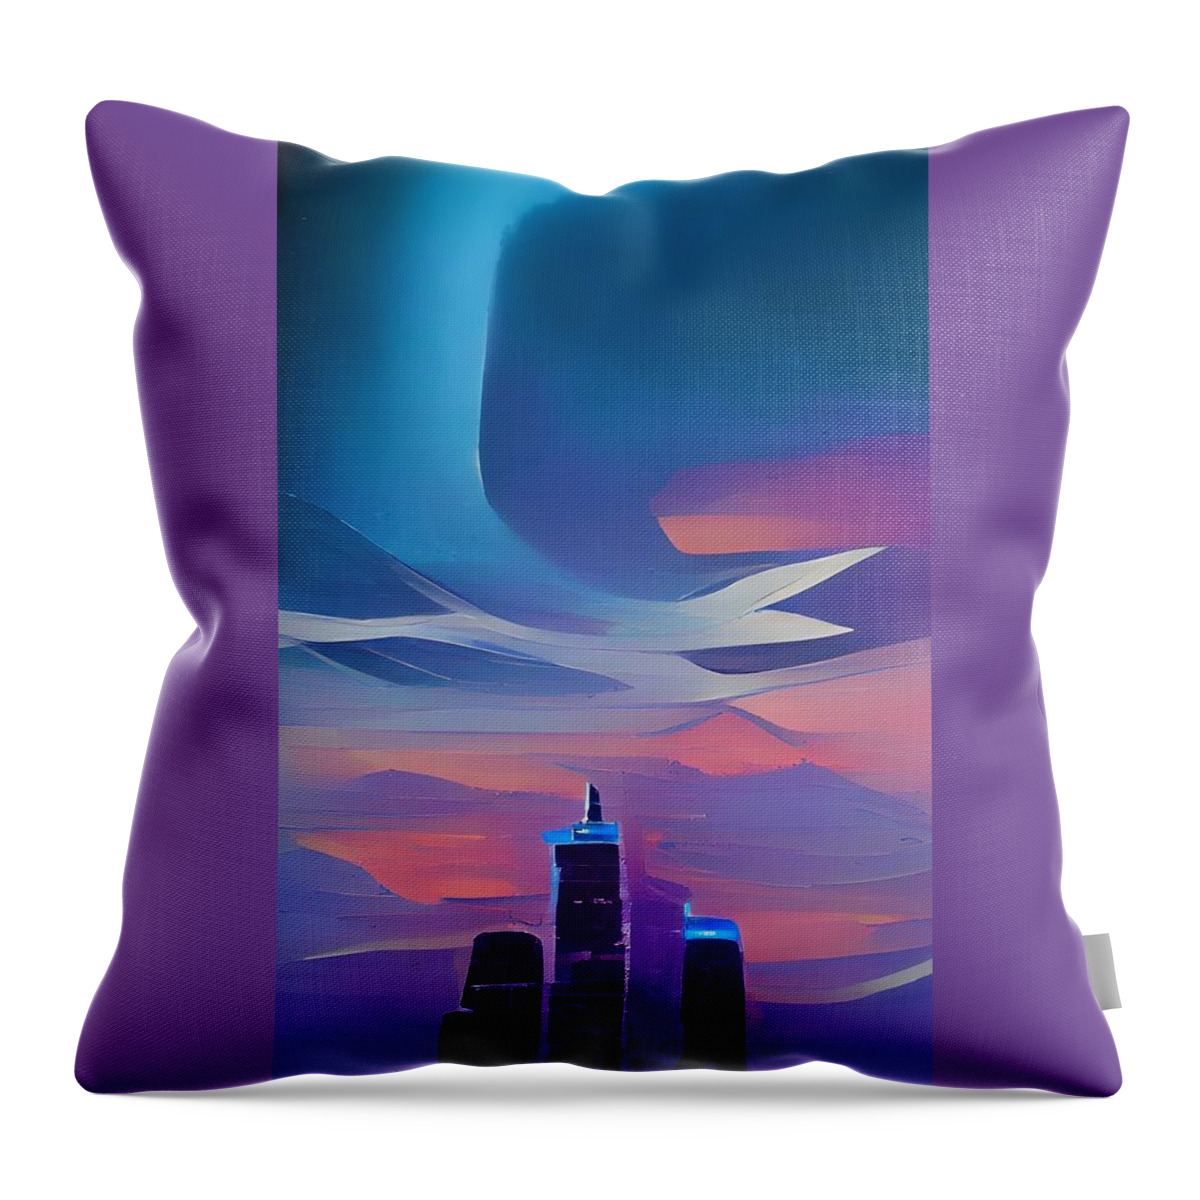  Throw Pillow featuring the digital art Cee Blue by Rod Turner